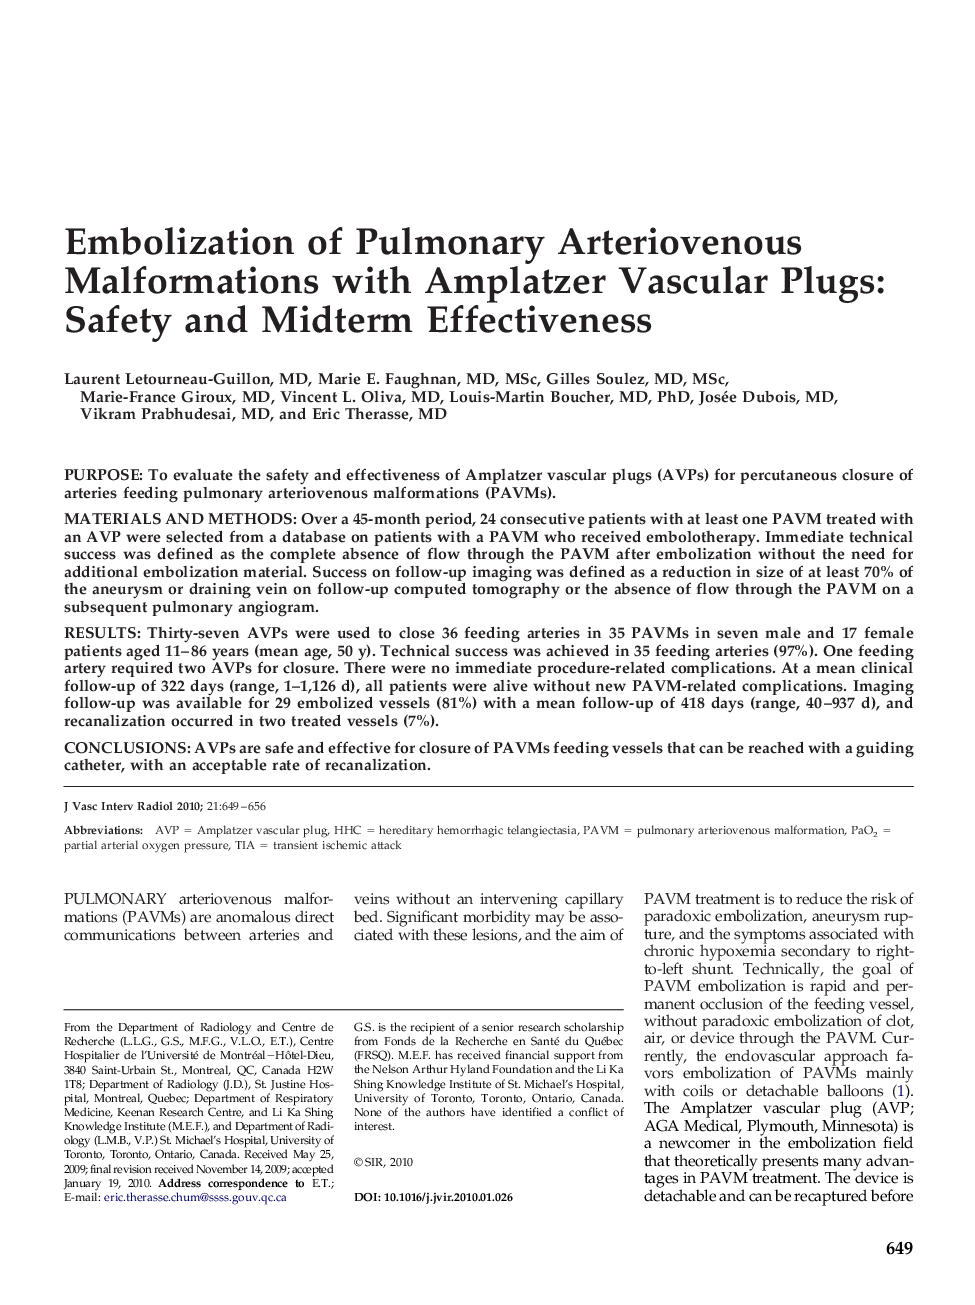 Embolization of Pulmonary Arteriovenous Malformations with Amplatzer Vascular Plugs: Safety and Midterm Effectiveness